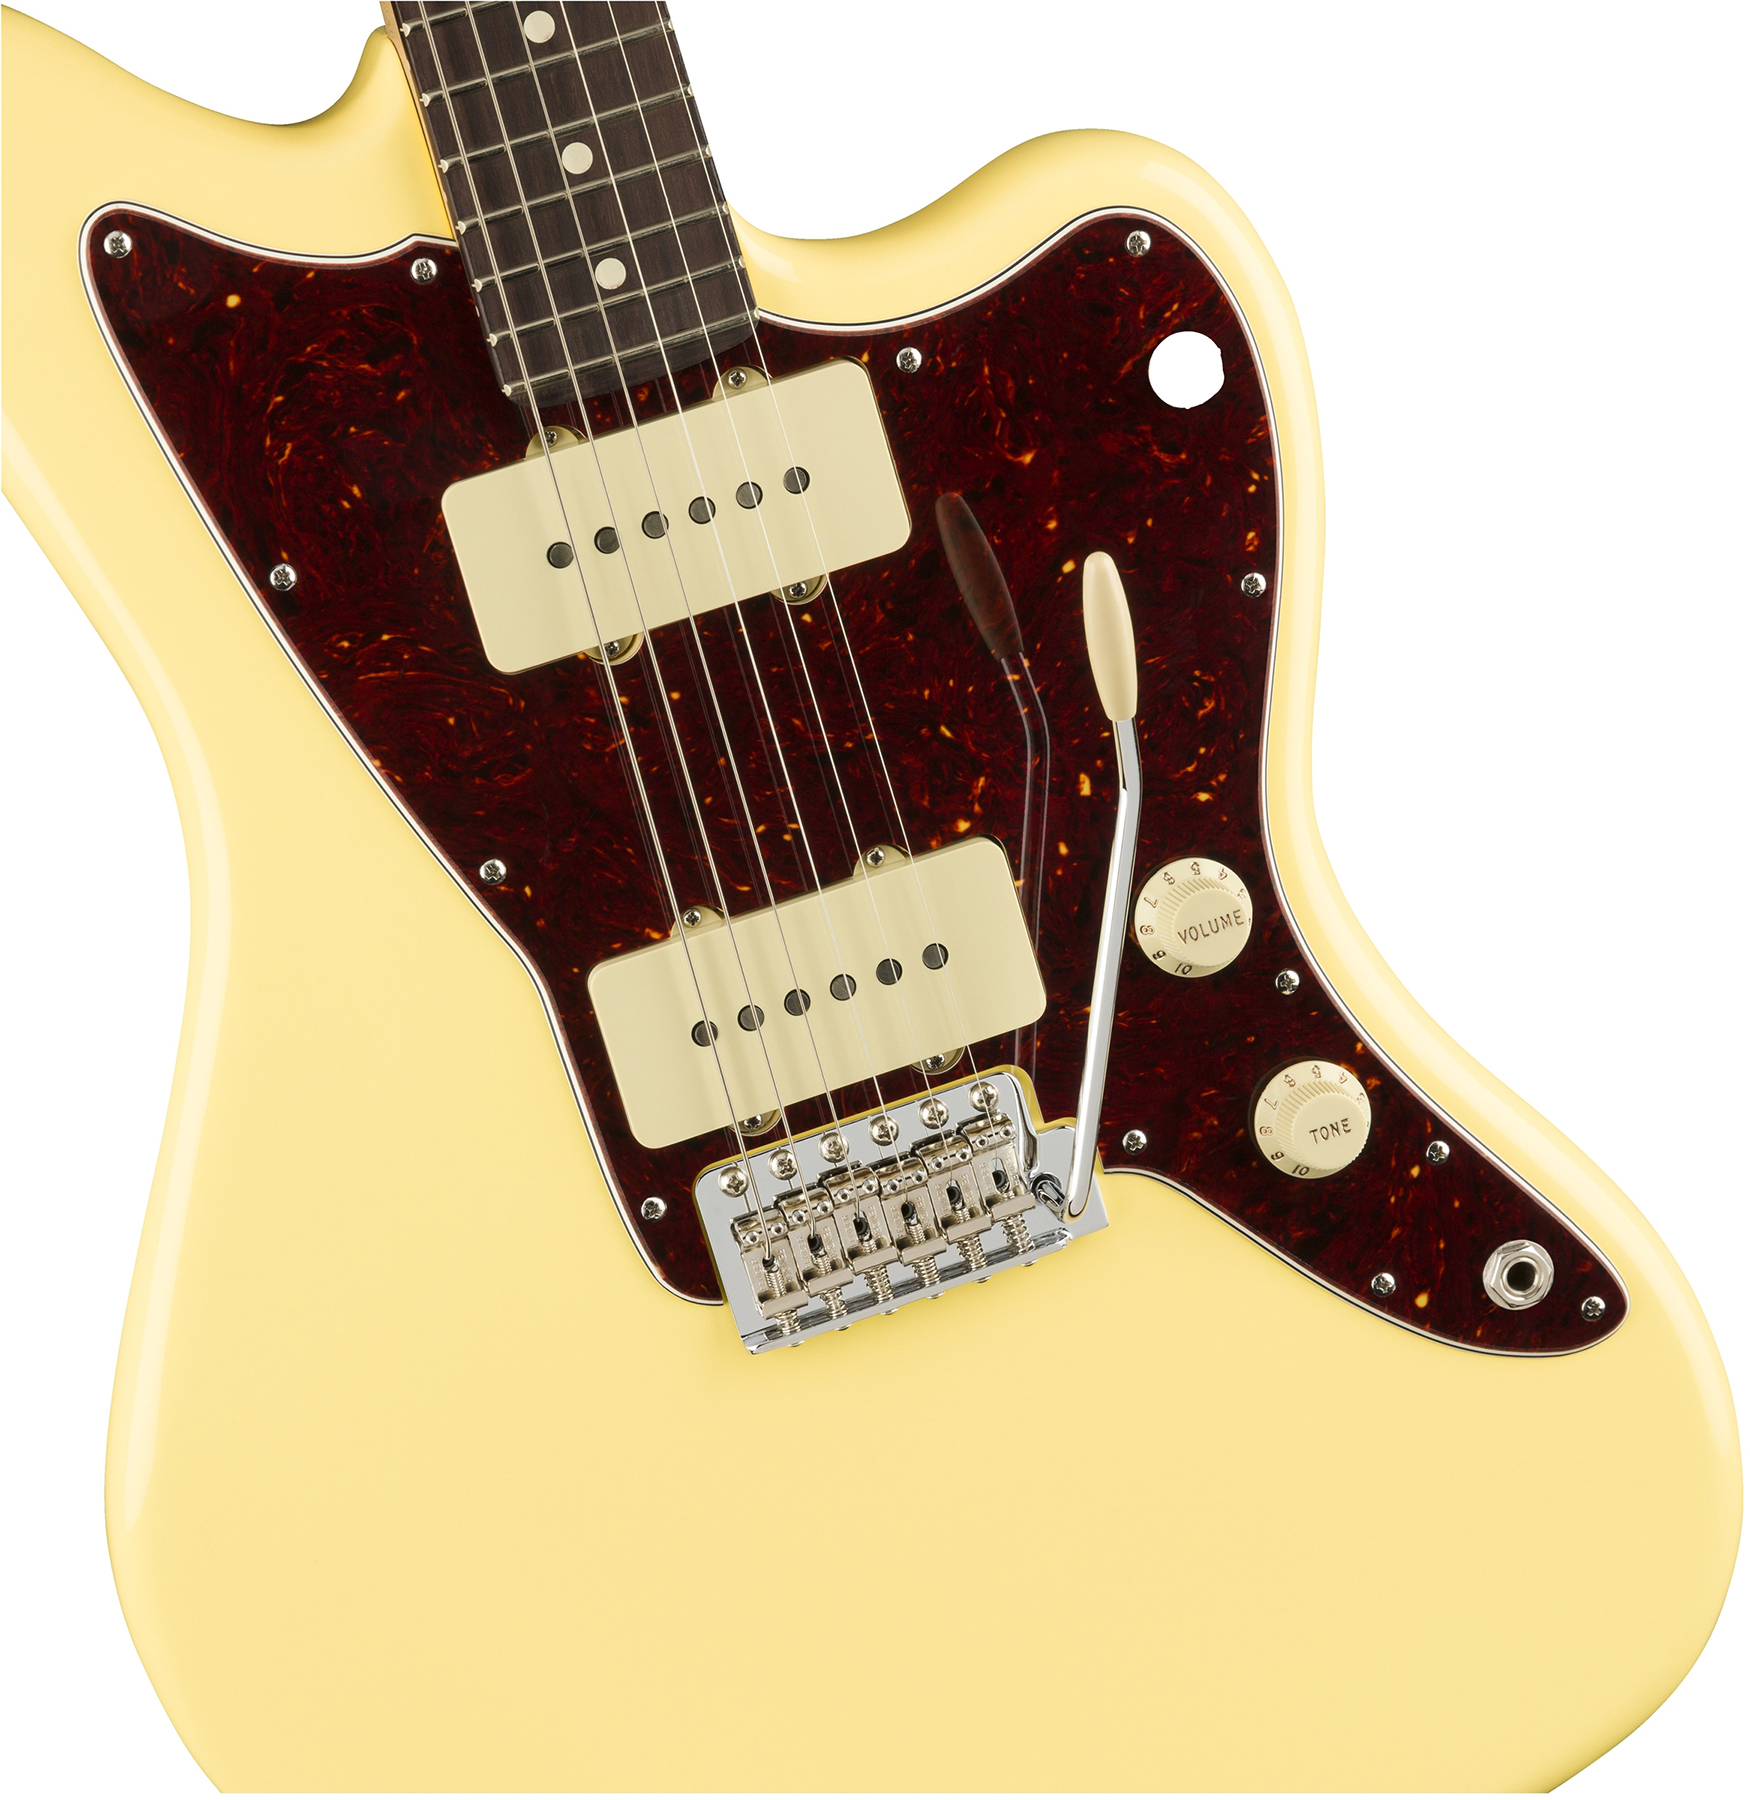 Fender Jazzmaster American Performer Usa Ss Rw - Vintage White - Double cut electric guitar - Variation 2